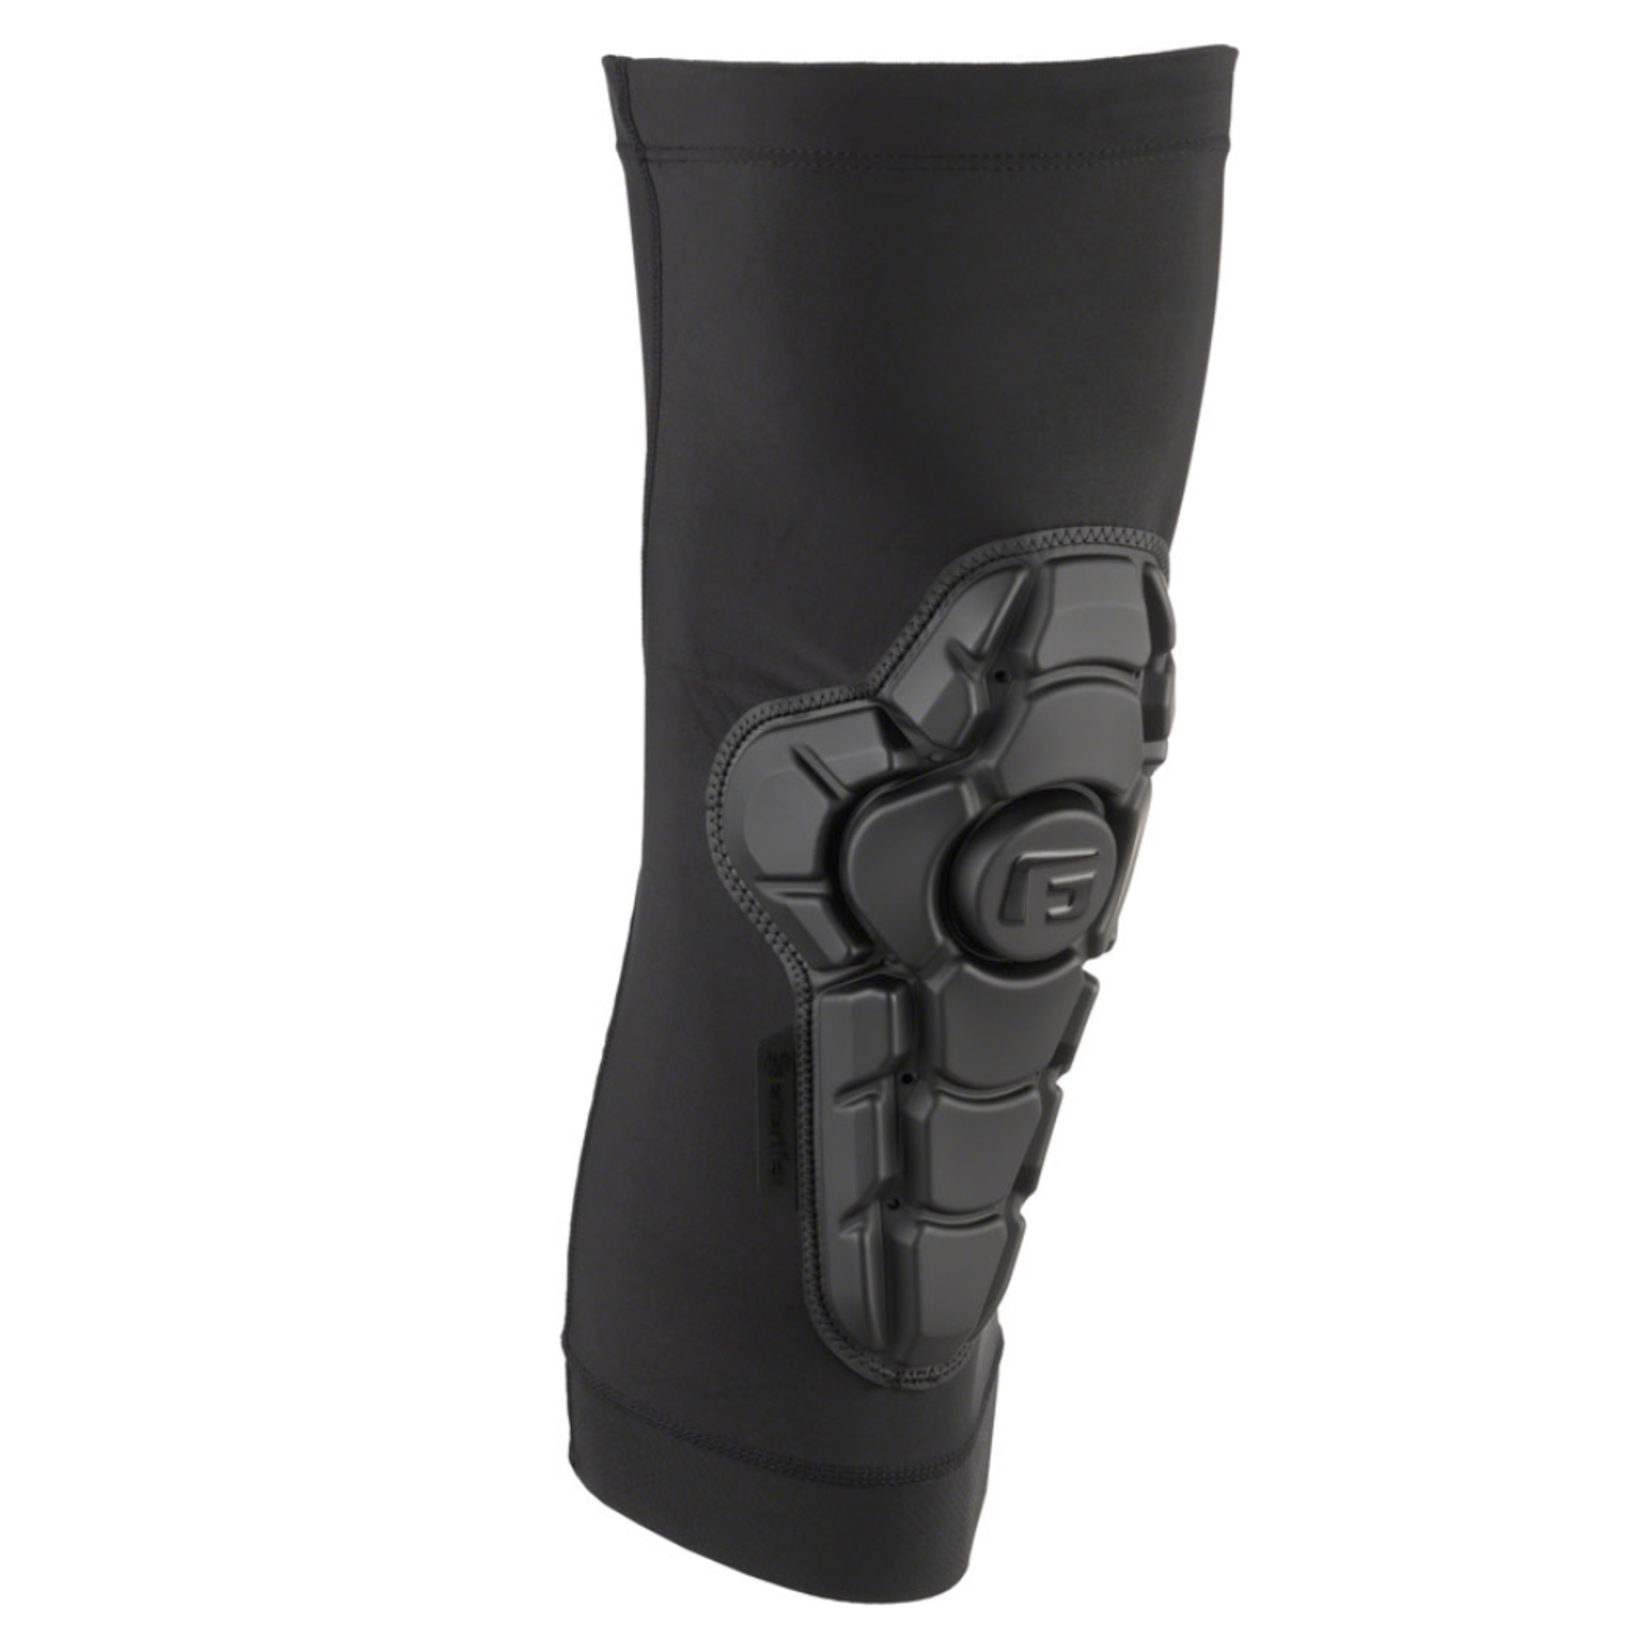 G-Form Protection -  G-Form Pro-X3 Knee Guards